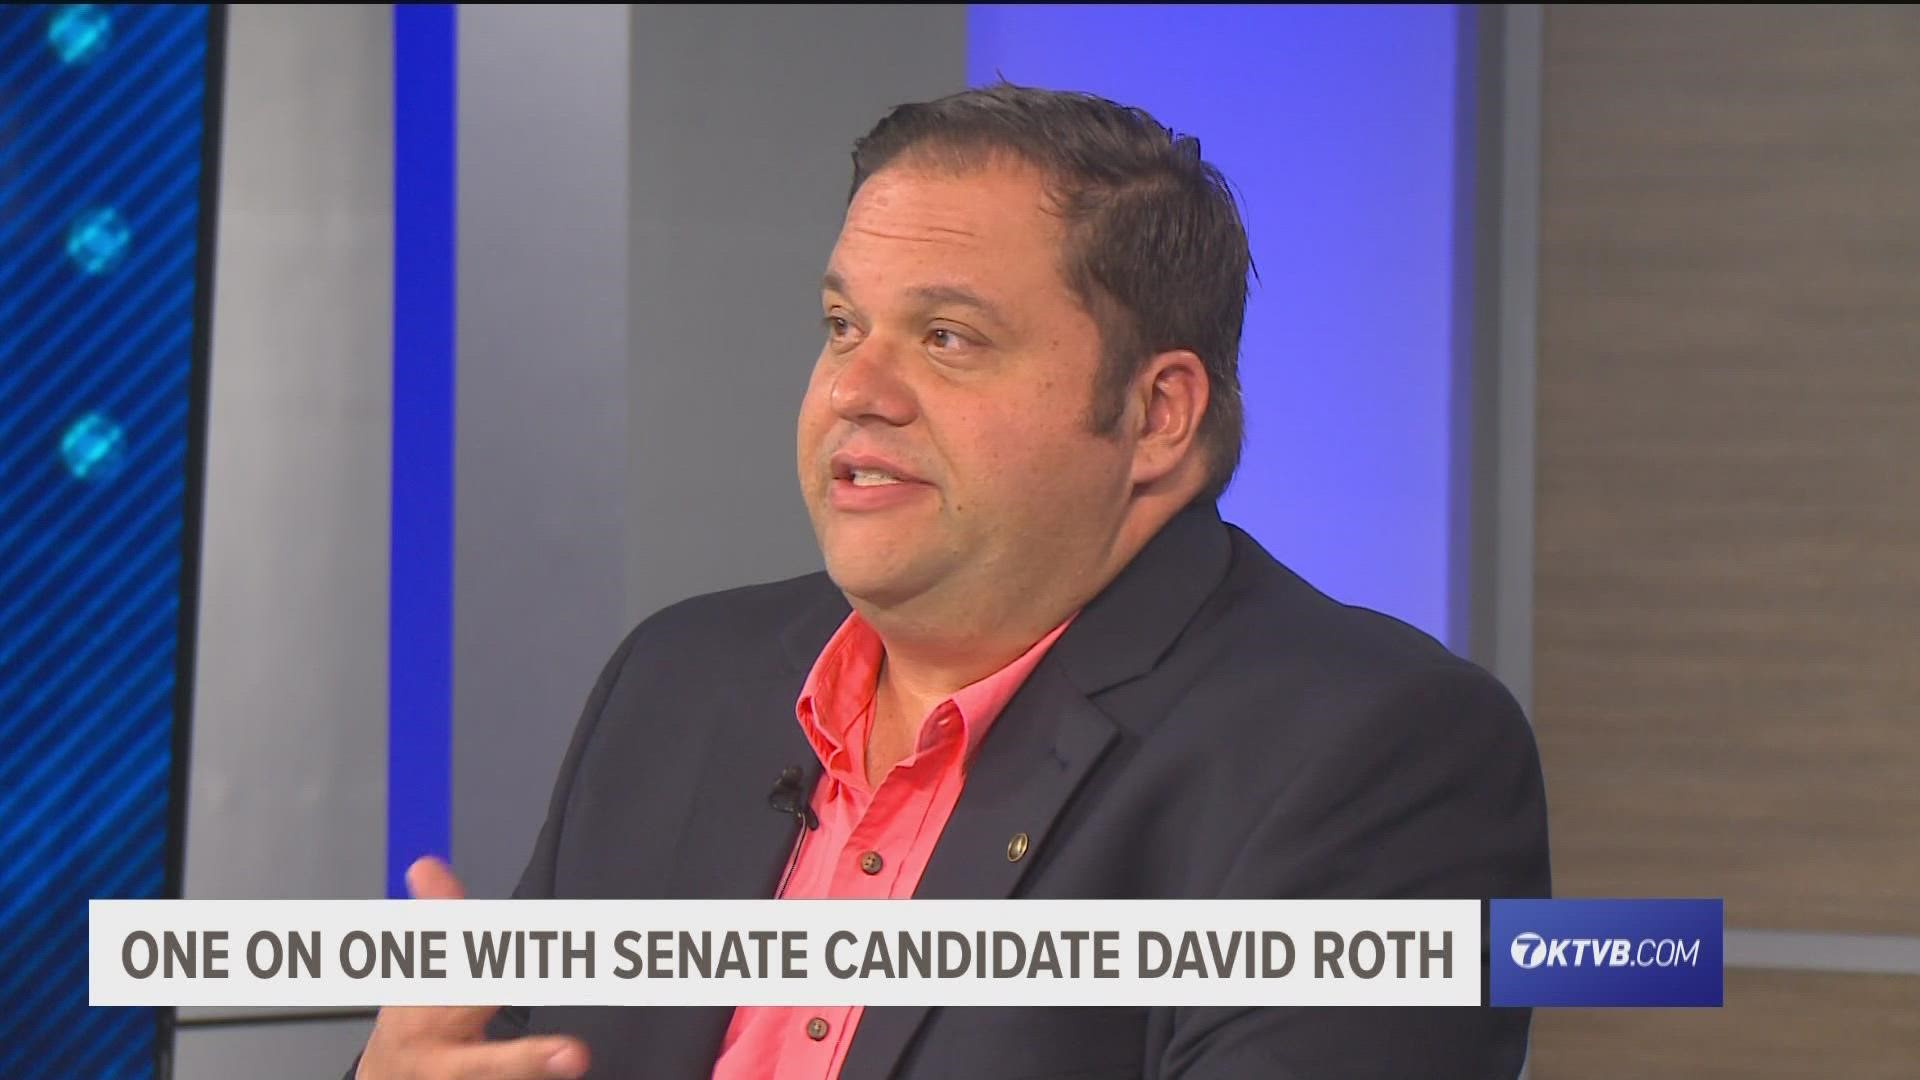 Ahead of the November election, Mr. Roth discusses his campaign priorities and thoughts on major Idaho politic topics.